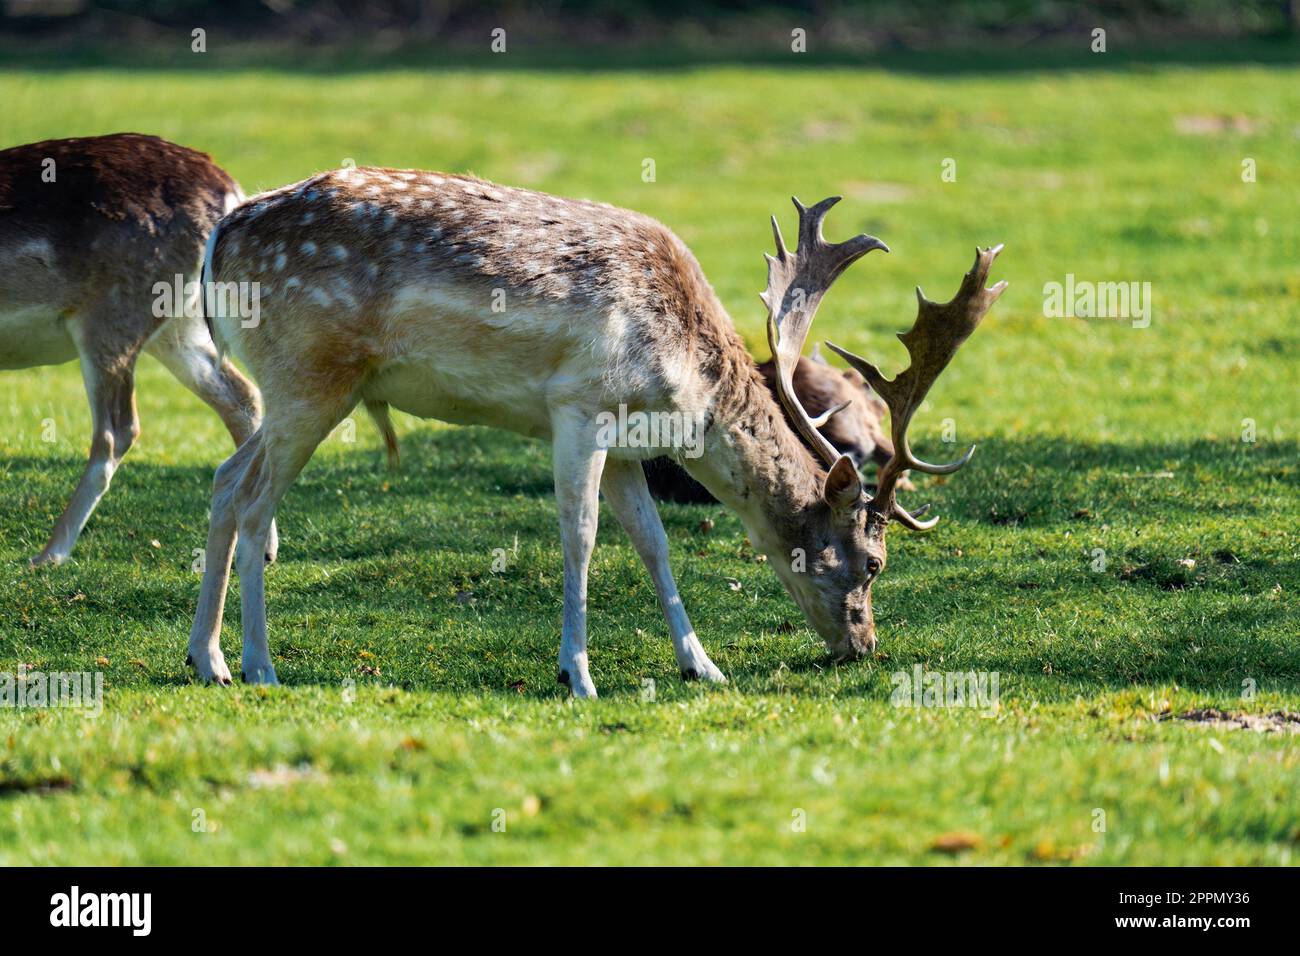 Male deer eating grass while being surrounded by female deers Stock Photo